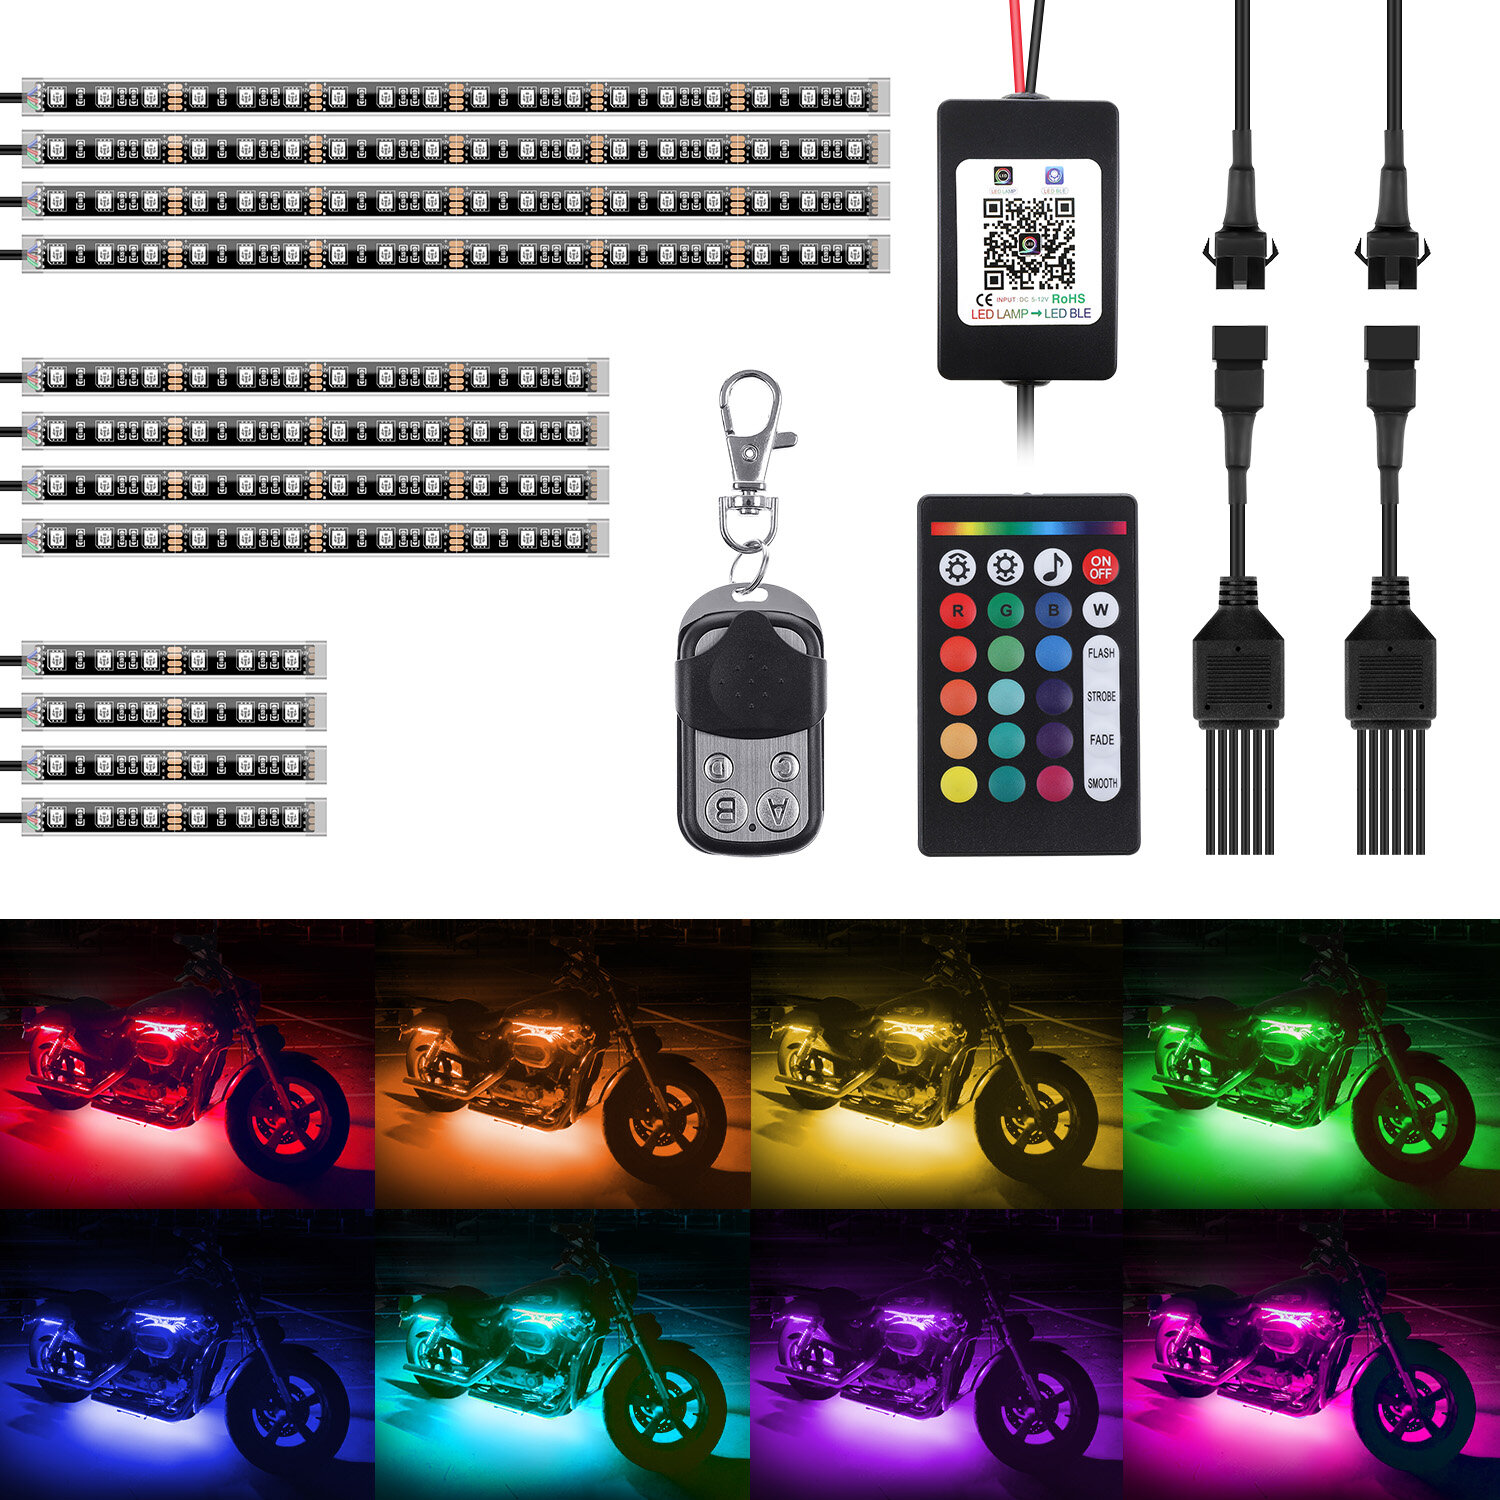 AMBOTHER 12Pcs Motorcycle LED Light Kit Strips RGB Waterproof with APP IR RF Wireless Remote Control